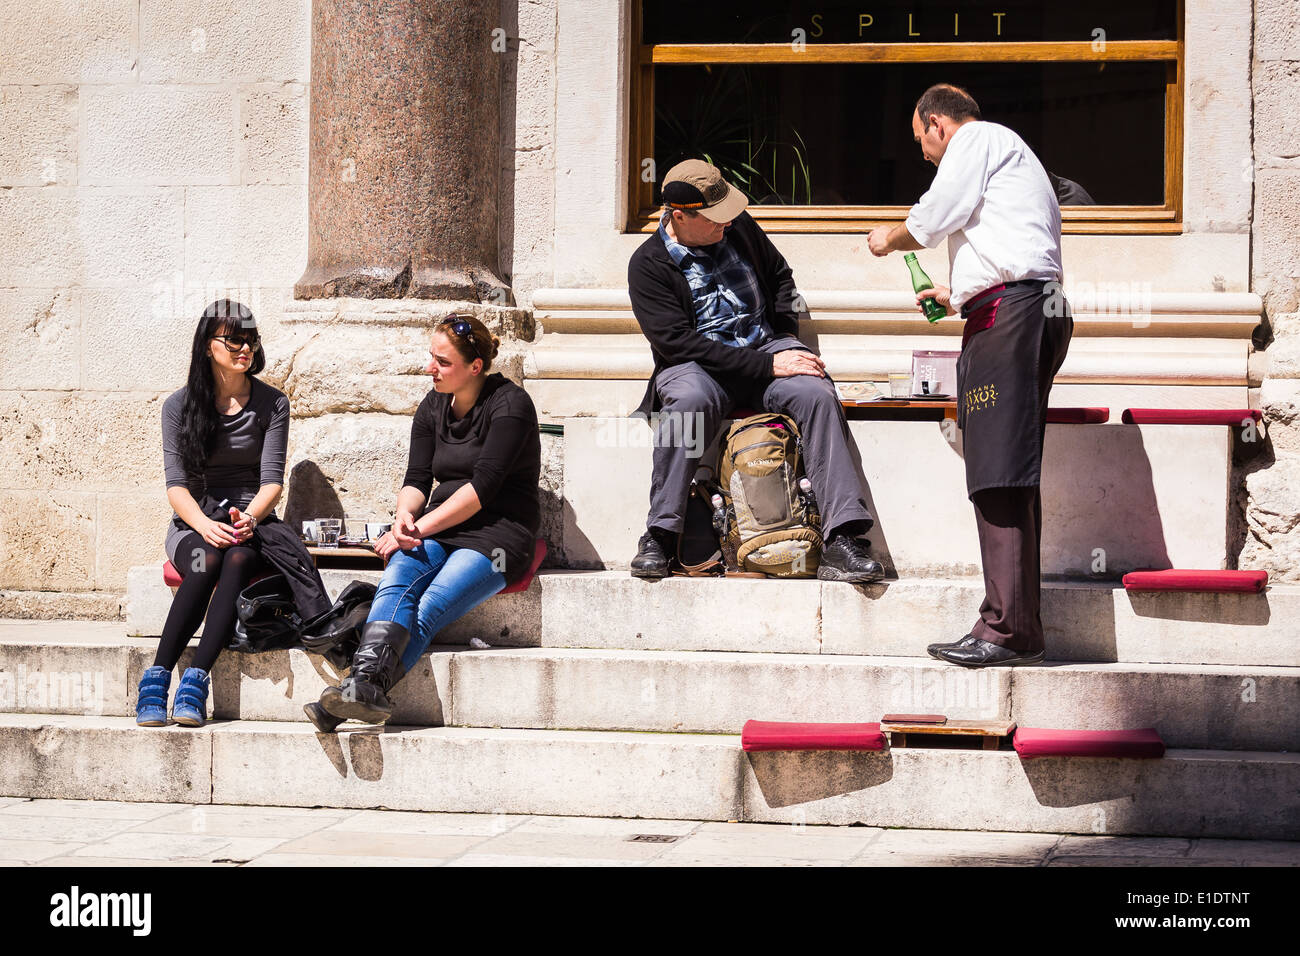 Two women sit enjoying drinks and conversation outside the Luxor hotel in Peristil, Split Croatia as a waiter serves a man Stock Photo